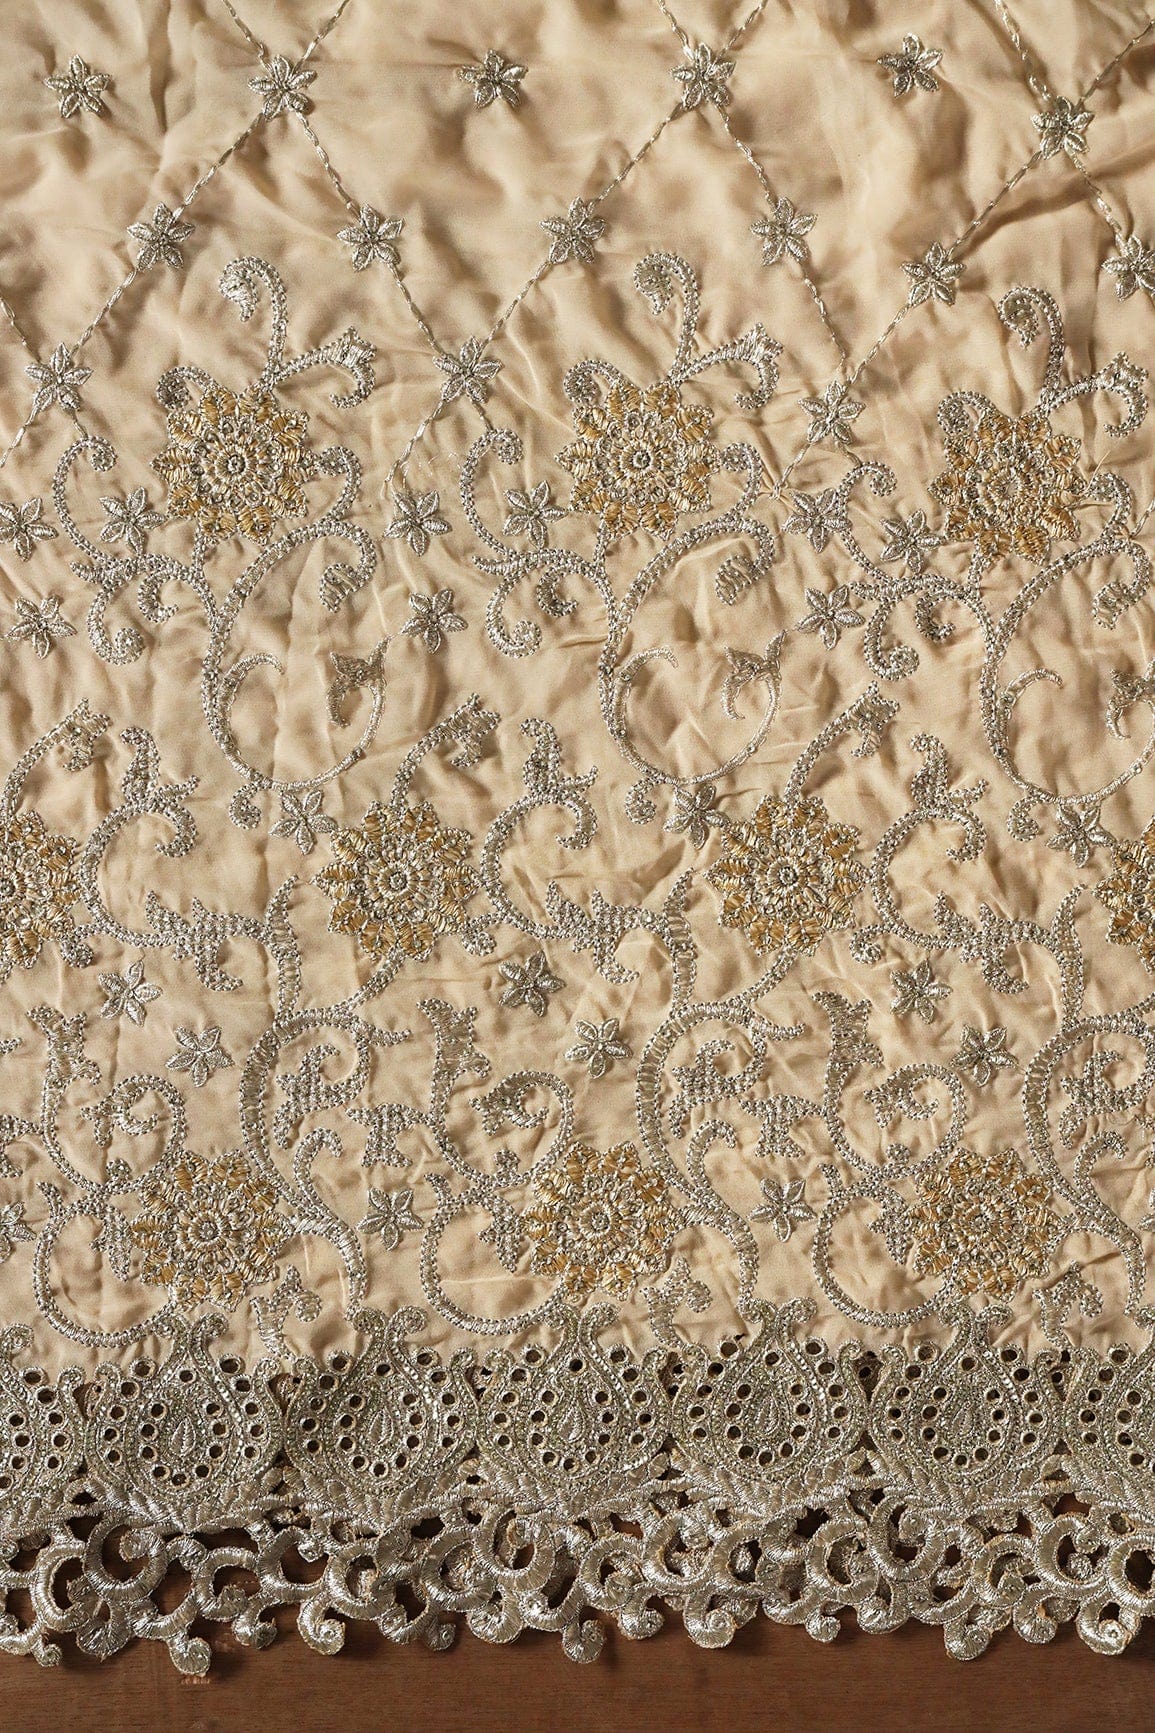 doeraa Embroidery Fabrics Big Width''56'' Gold And Silver Zari Floral Embroidery Work On Beige Georgette Fabric With Border